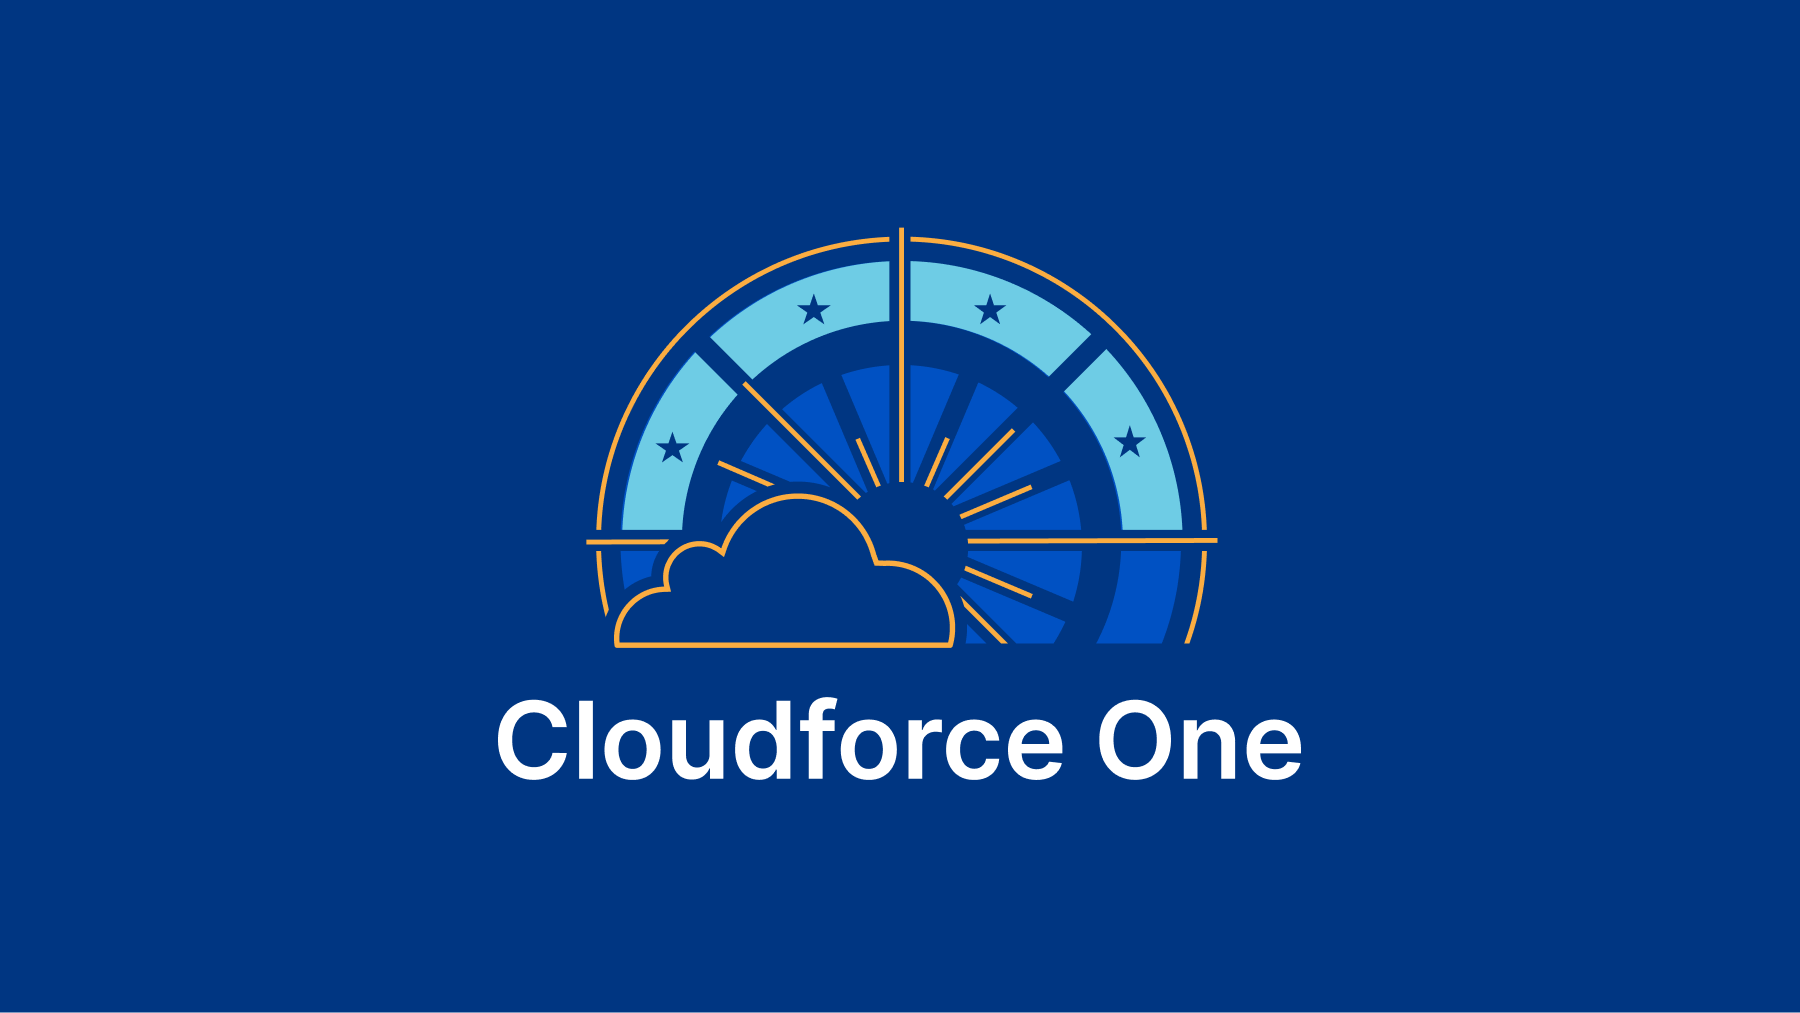 Introducing Cloudforce One: our new threat operations and research team